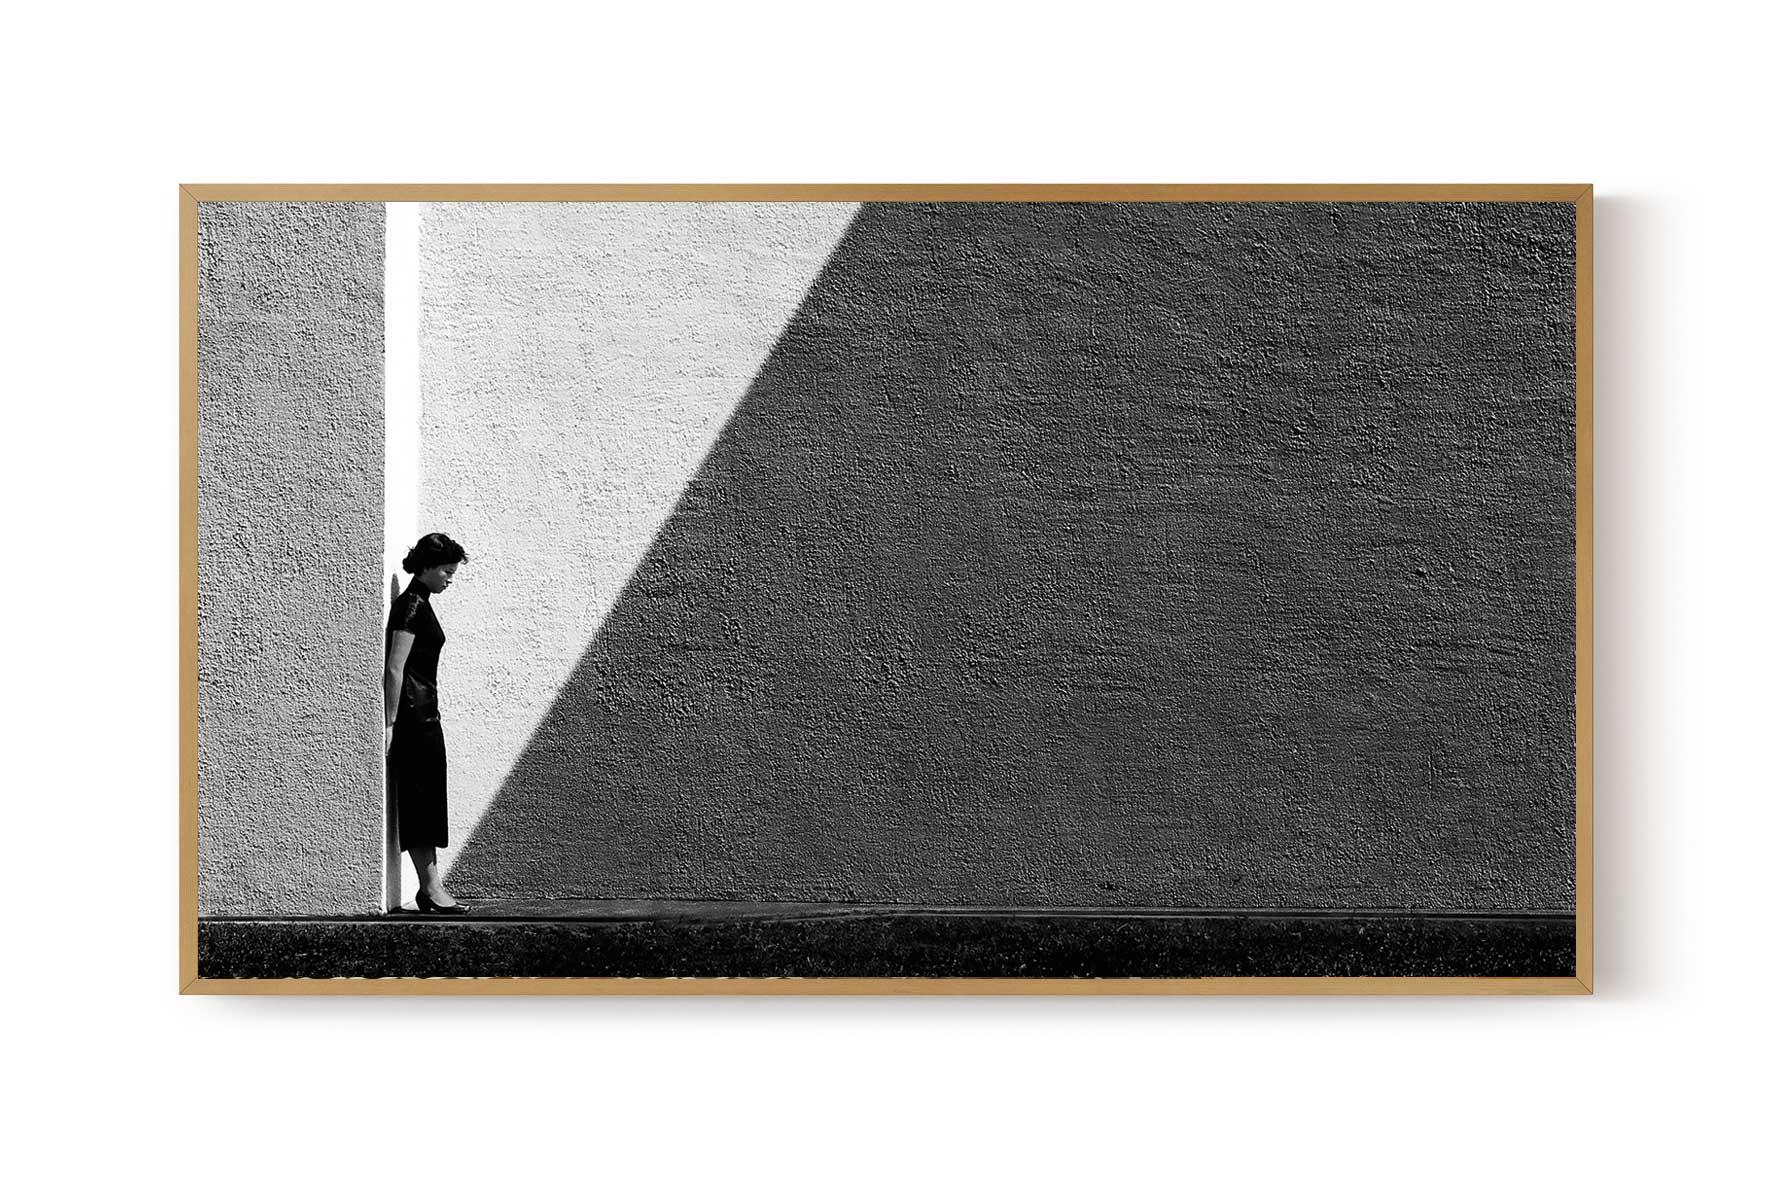 Fan Ho, Approaching Shadow (1954), Samsung Collection